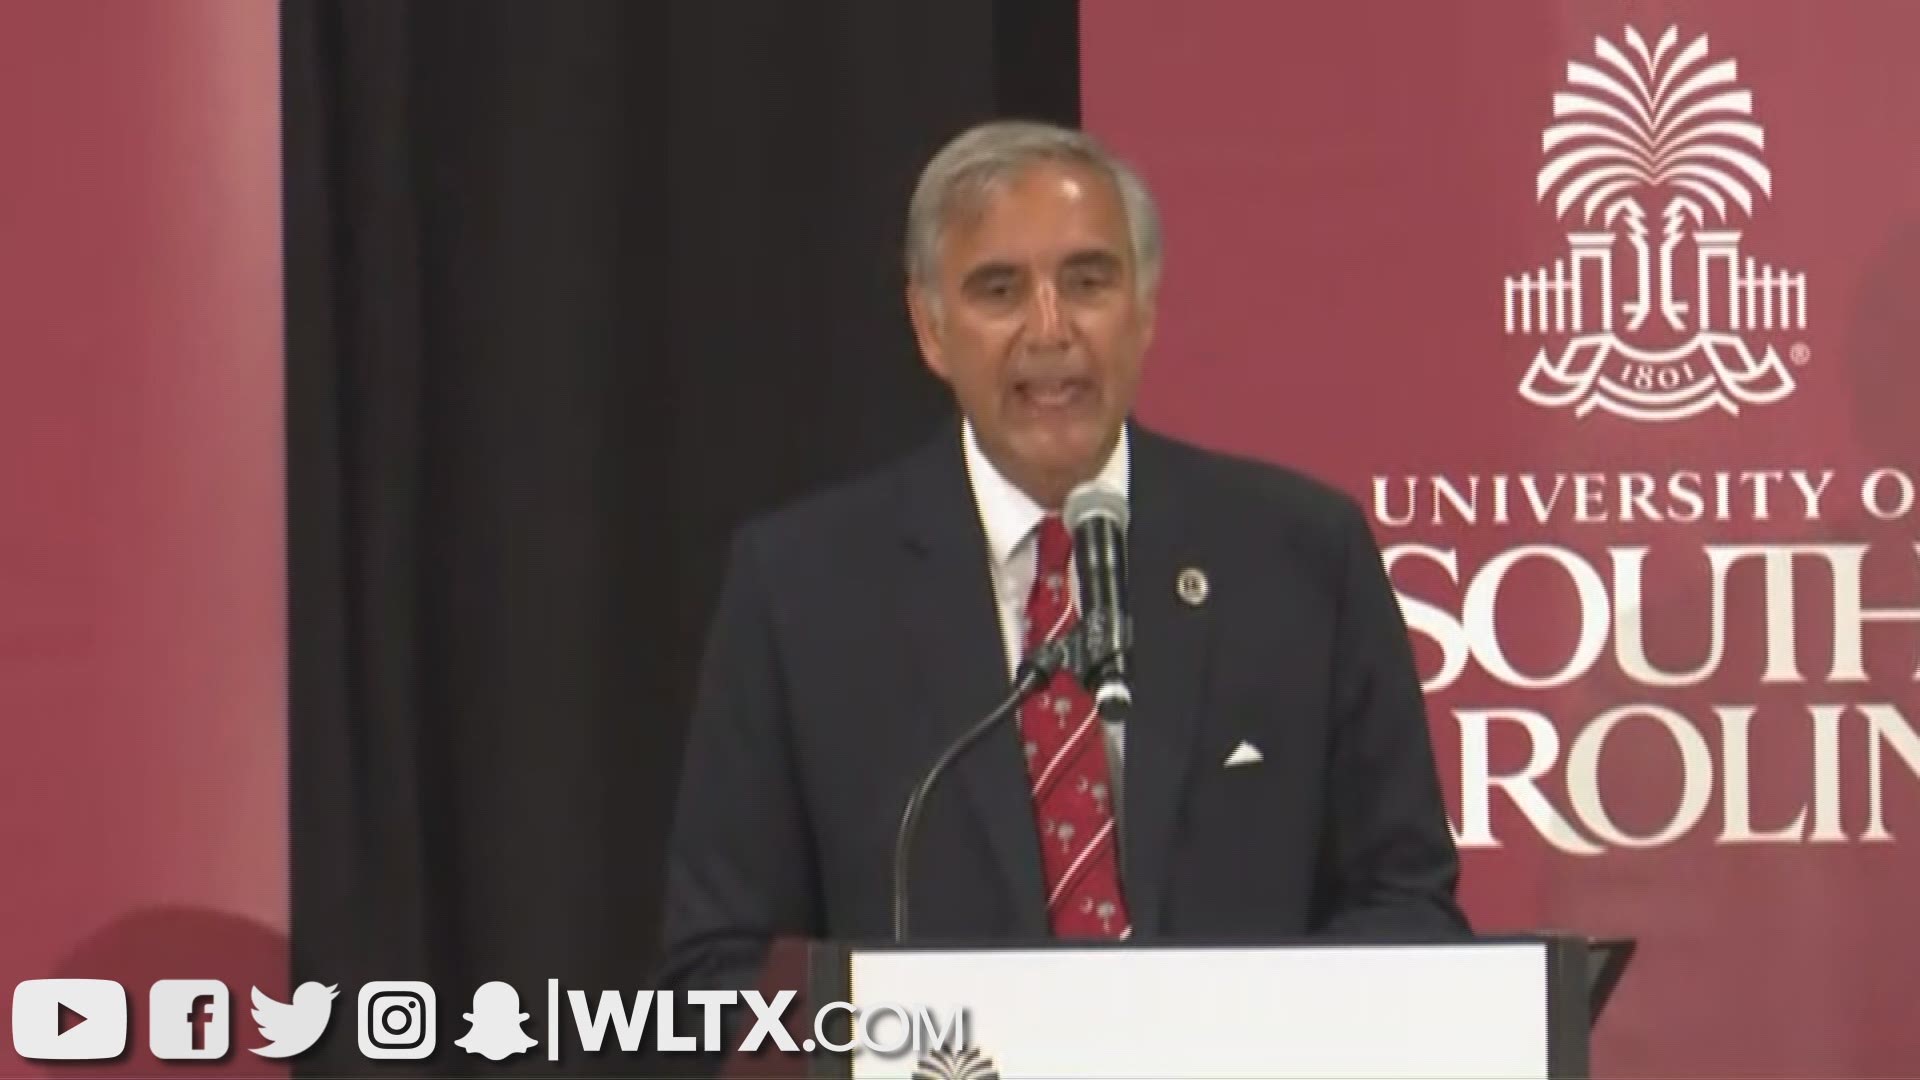 University of South Carolina President Harris Pastides' opening statement at the ceremony for the unveiling of the special collections of former Governor Dick Riley at the university.